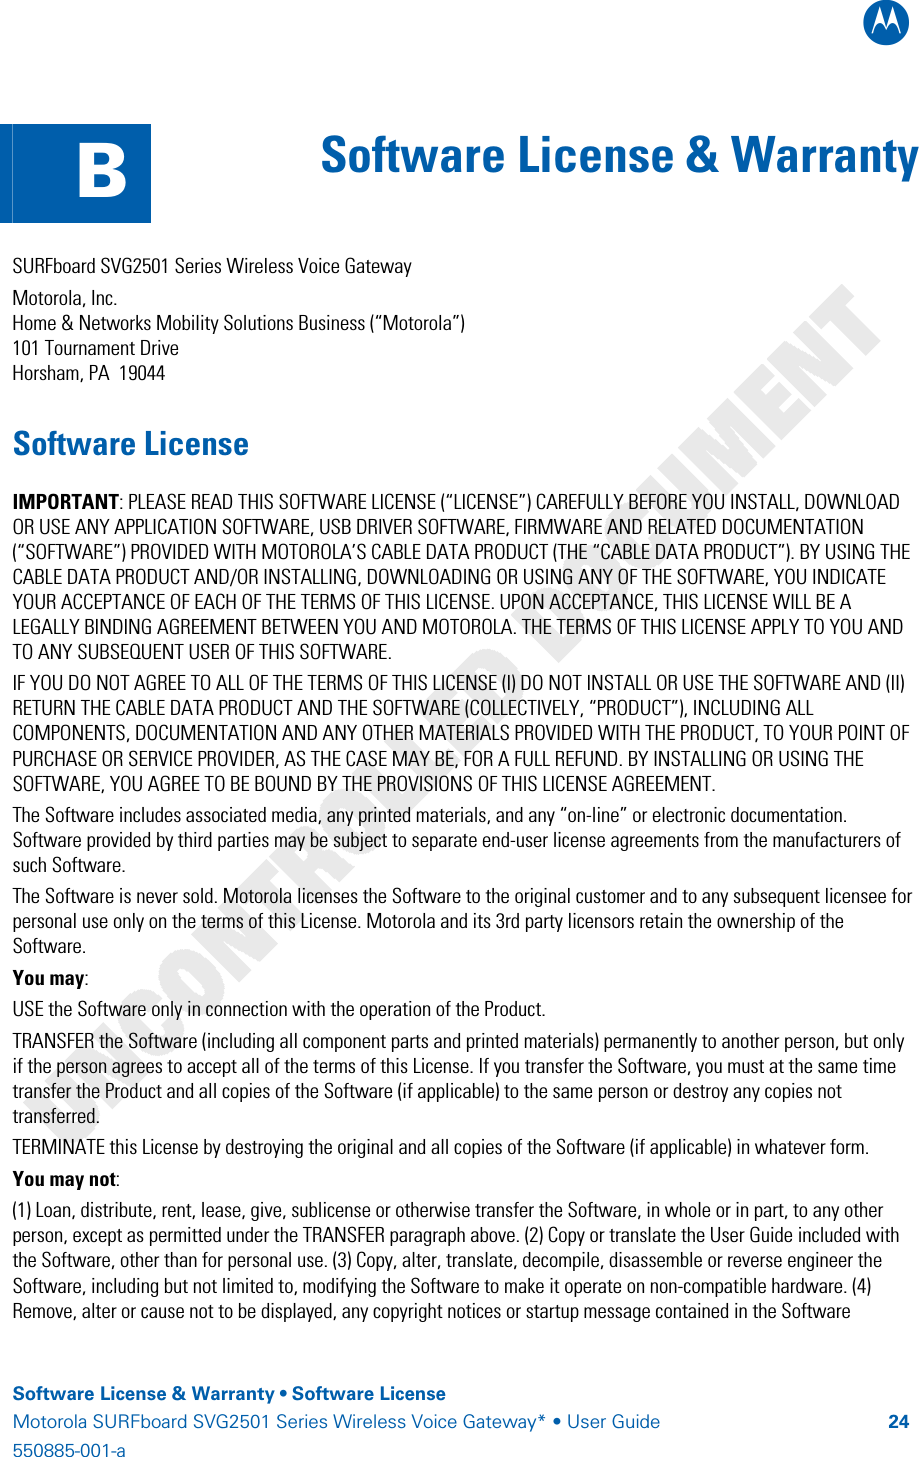 B    Software License &amp; Warranty • Software License Motorola SURFboard SVG2501 Series Wireless Voice Gateway* • User Guide  24550885-001-a    B  Software License &amp; Warranty   SURFboard SVG2501 Series Wireless Voice Gateway Motorola, Inc.  Home &amp; Networks Mobility Solutions Business (“Motorola”)  101 Tournament Drive Horsham, PA  19044 Software License IMPORTANT: PLEASE READ THIS SOFTWARE LICENSE (“LICENSE”) CAREFULLY BEFORE YOU INSTALL, DOWNLOAD OR USE ANY APPLICATION SOFTWARE, USB DRIVER SOFTWARE, FIRMWARE AND RELATED DOCUMENTATION (“SOFTWARE”) PROVIDED WITH MOTOROLA’S CABLE DATA PRODUCT (THE “CABLE DATA PRODUCT”). BY USING THE CABLE DATA PRODUCT AND/OR INSTALLING, DOWNLOADING OR USING ANY OF THE SOFTWARE, YOU INDICATE YOUR ACCEPTANCE OF EACH OF THE TERMS OF THIS LICENSE. UPON ACCEPTANCE, THIS LICENSE WILL BE A LEGALLY BINDING AGREEMENT BETWEEN YOU AND MOTOROLA. THE TERMS OF THIS LICENSE APPLY TO YOU AND TO ANY SUBSEQUENT USER OF THIS SOFTWARE.  IF YOU DO NOT AGREE TO ALL OF THE TERMS OF THIS LICENSE (I) DO NOT INSTALL OR USE THE SOFTWARE AND (II) RETURN THE CABLE DATA PRODUCT AND THE SOFTWARE (COLLECTIVELY, “PRODUCT”), INCLUDING ALL COMPONENTS, DOCUMENTATION AND ANY OTHER MATERIALS PROVIDED WITH THE PRODUCT, TO YOUR POINT OF PURCHASE OR SERVICE PROVIDER, AS THE CASE MAY BE, FOR A FULL REFUND. BY INSTALLING OR USING THE SOFTWARE, YOU AGREE TO BE BOUND BY THE PROVISIONS OF THIS LICENSE AGREEMENT. The Software includes associated media, any printed materials, and any “on-line” or electronic documentation. Software provided by third parties may be subject to separate end-user license agreements from the manufacturers of such Software. The Software is never sold. Motorola licenses the Software to the original customer and to any subsequent licensee for personal use only on the terms of this License. Motorola and its 3rd party licensors retain the ownership of the Software.  You may: USE the Software only in connection with the operation of the Product.  TRANSFER the Software (including all component parts and printed materials) permanently to another person, but only if the person agrees to accept all of the terms of this License. If you transfer the Software, you must at the same time transfer the Product and all copies of the Software (if applicable) to the same person or destroy any copies not transferred.  TERMINATE this License by destroying the original and all copies of the Software (if applicable) in whatever form. You may not: (1) Loan, distribute, rent, lease, give, sublicense or otherwise transfer the Software, in whole or in part, to any other person, except as permitted under the TRANSFER paragraph above. (2) Copy or translate the User Guide included with the Software, other than for personal use. (3) Copy, alter, translate, decompile, disassemble or reverse engineer the Software, including but not limited to, modifying the Software to make it operate on non-compatible hardware. (4) Remove, alter or cause not to be displayed, any copyright notices or startup message contained in the Software 